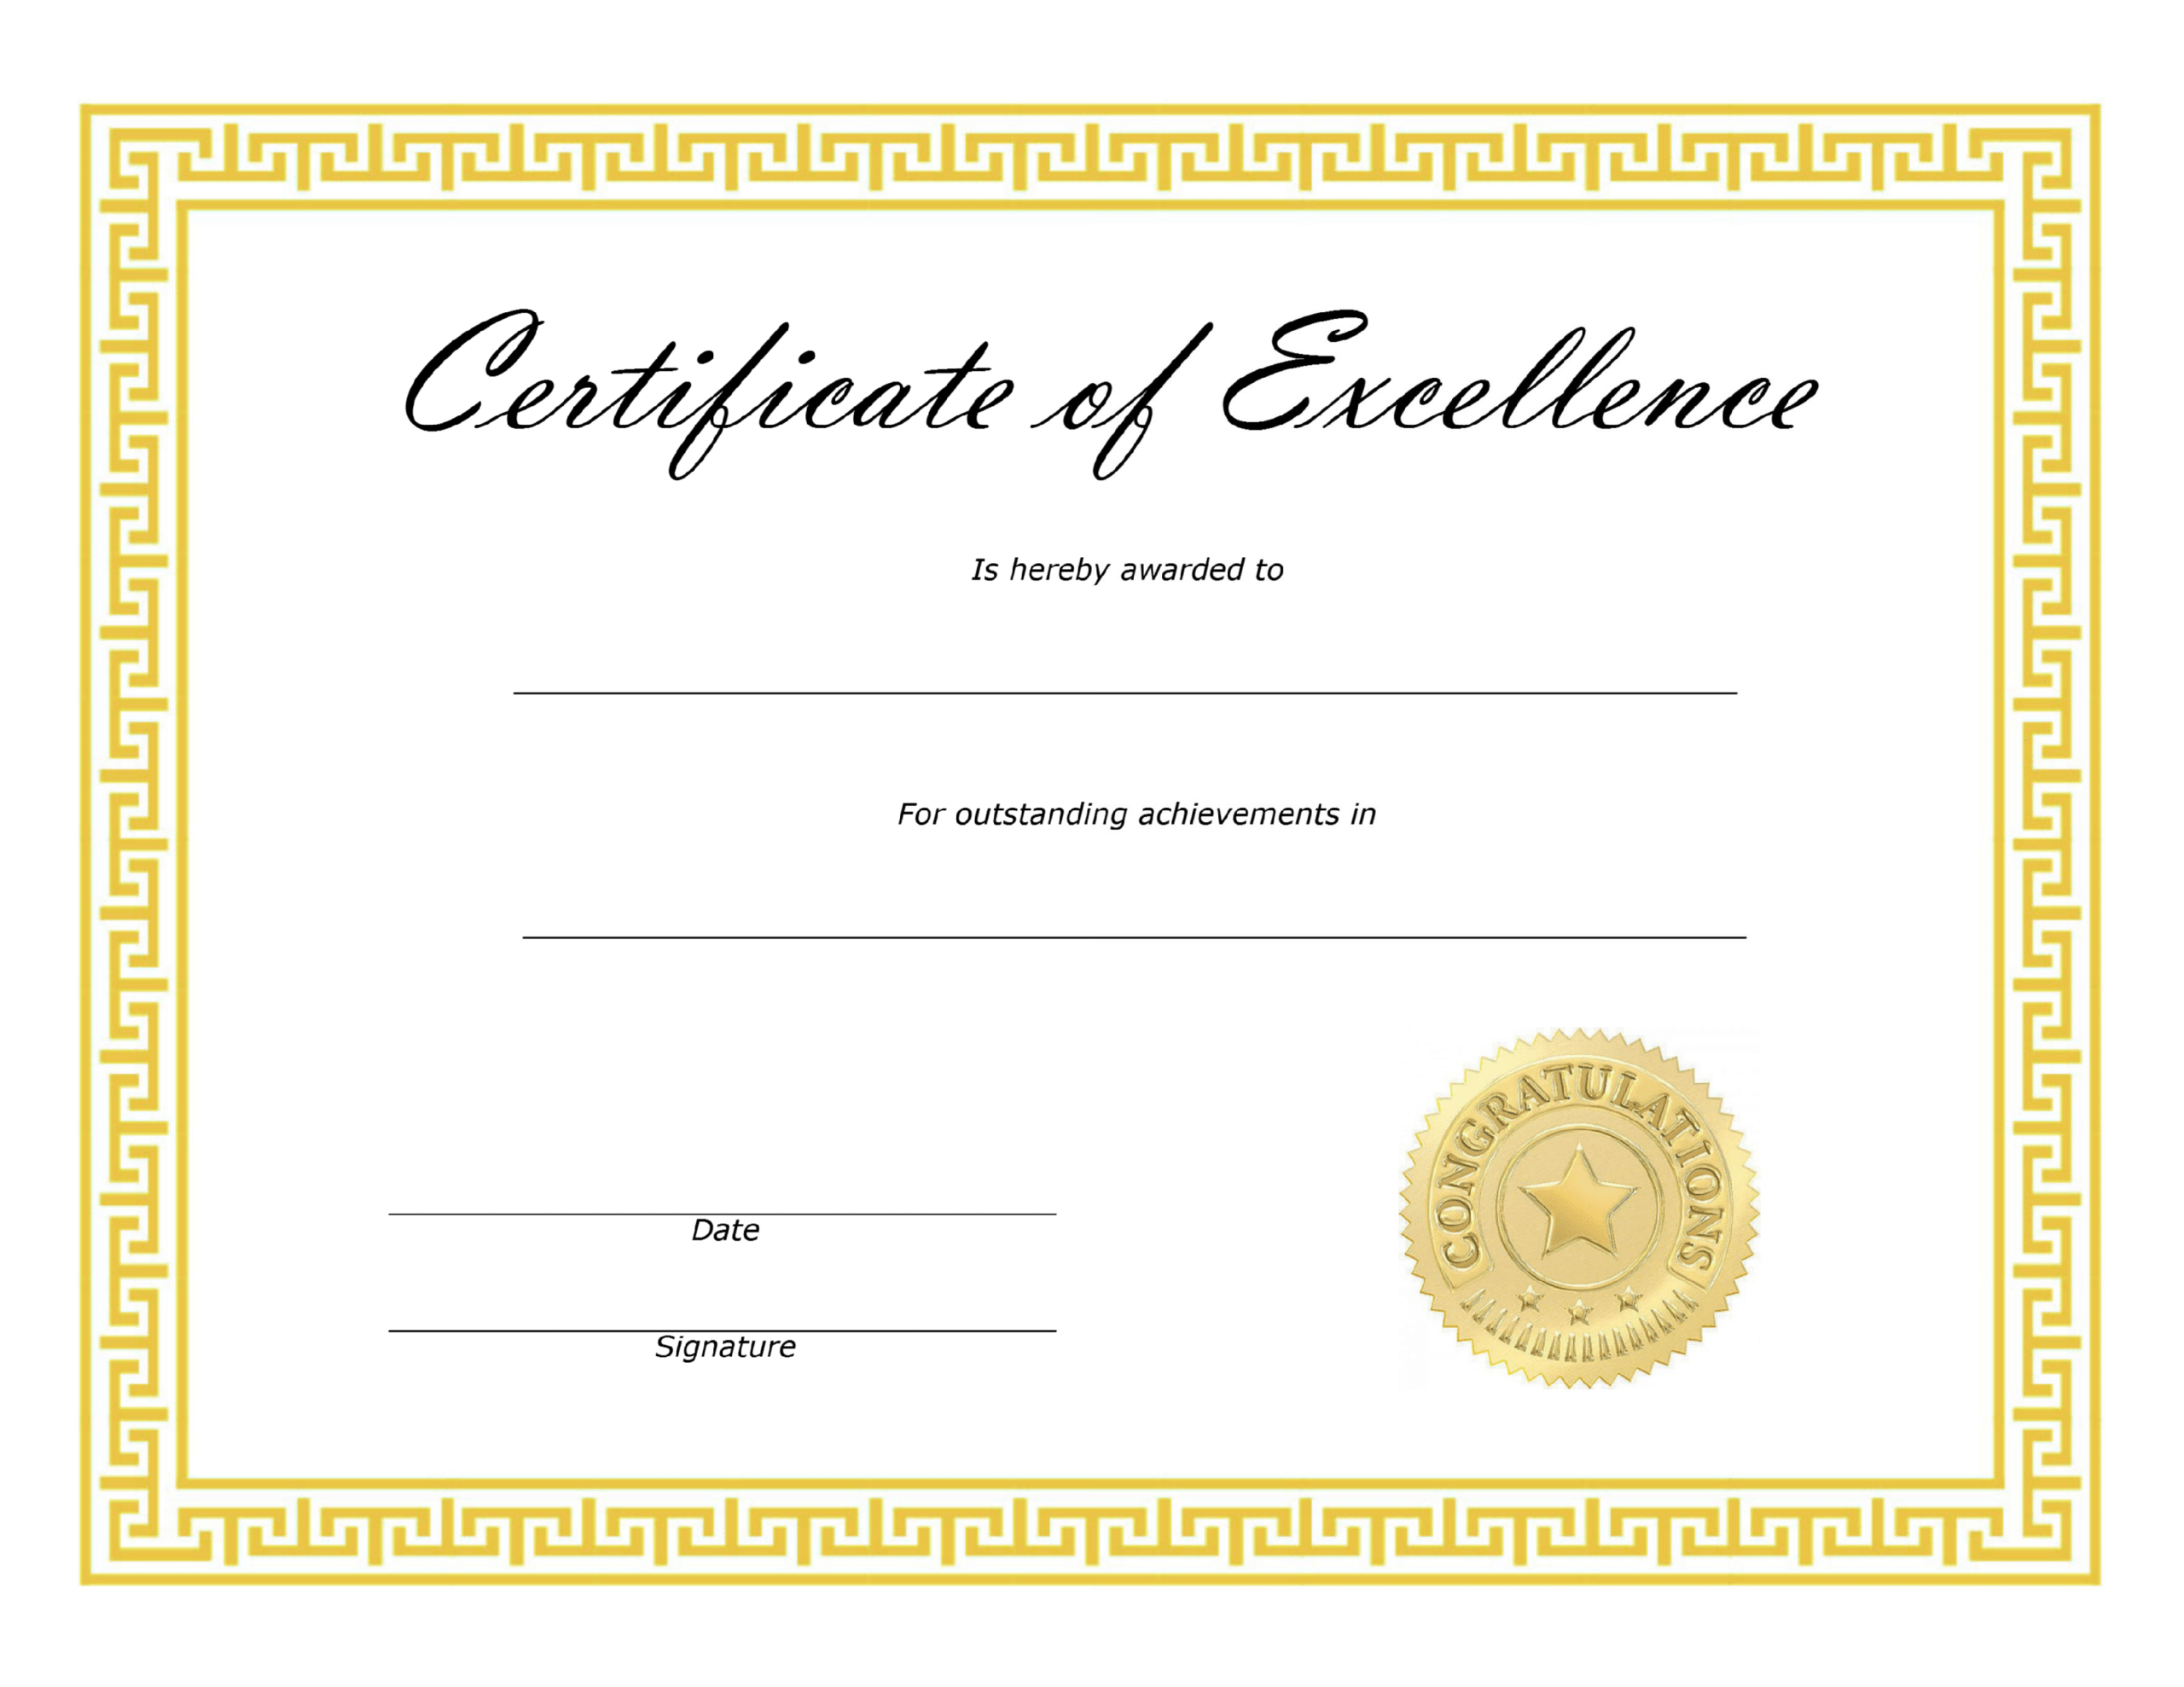 ❤️ Free Sample Certificate Of Excellence Templates❤️ Intended For Free Certificate Of Excellence Template